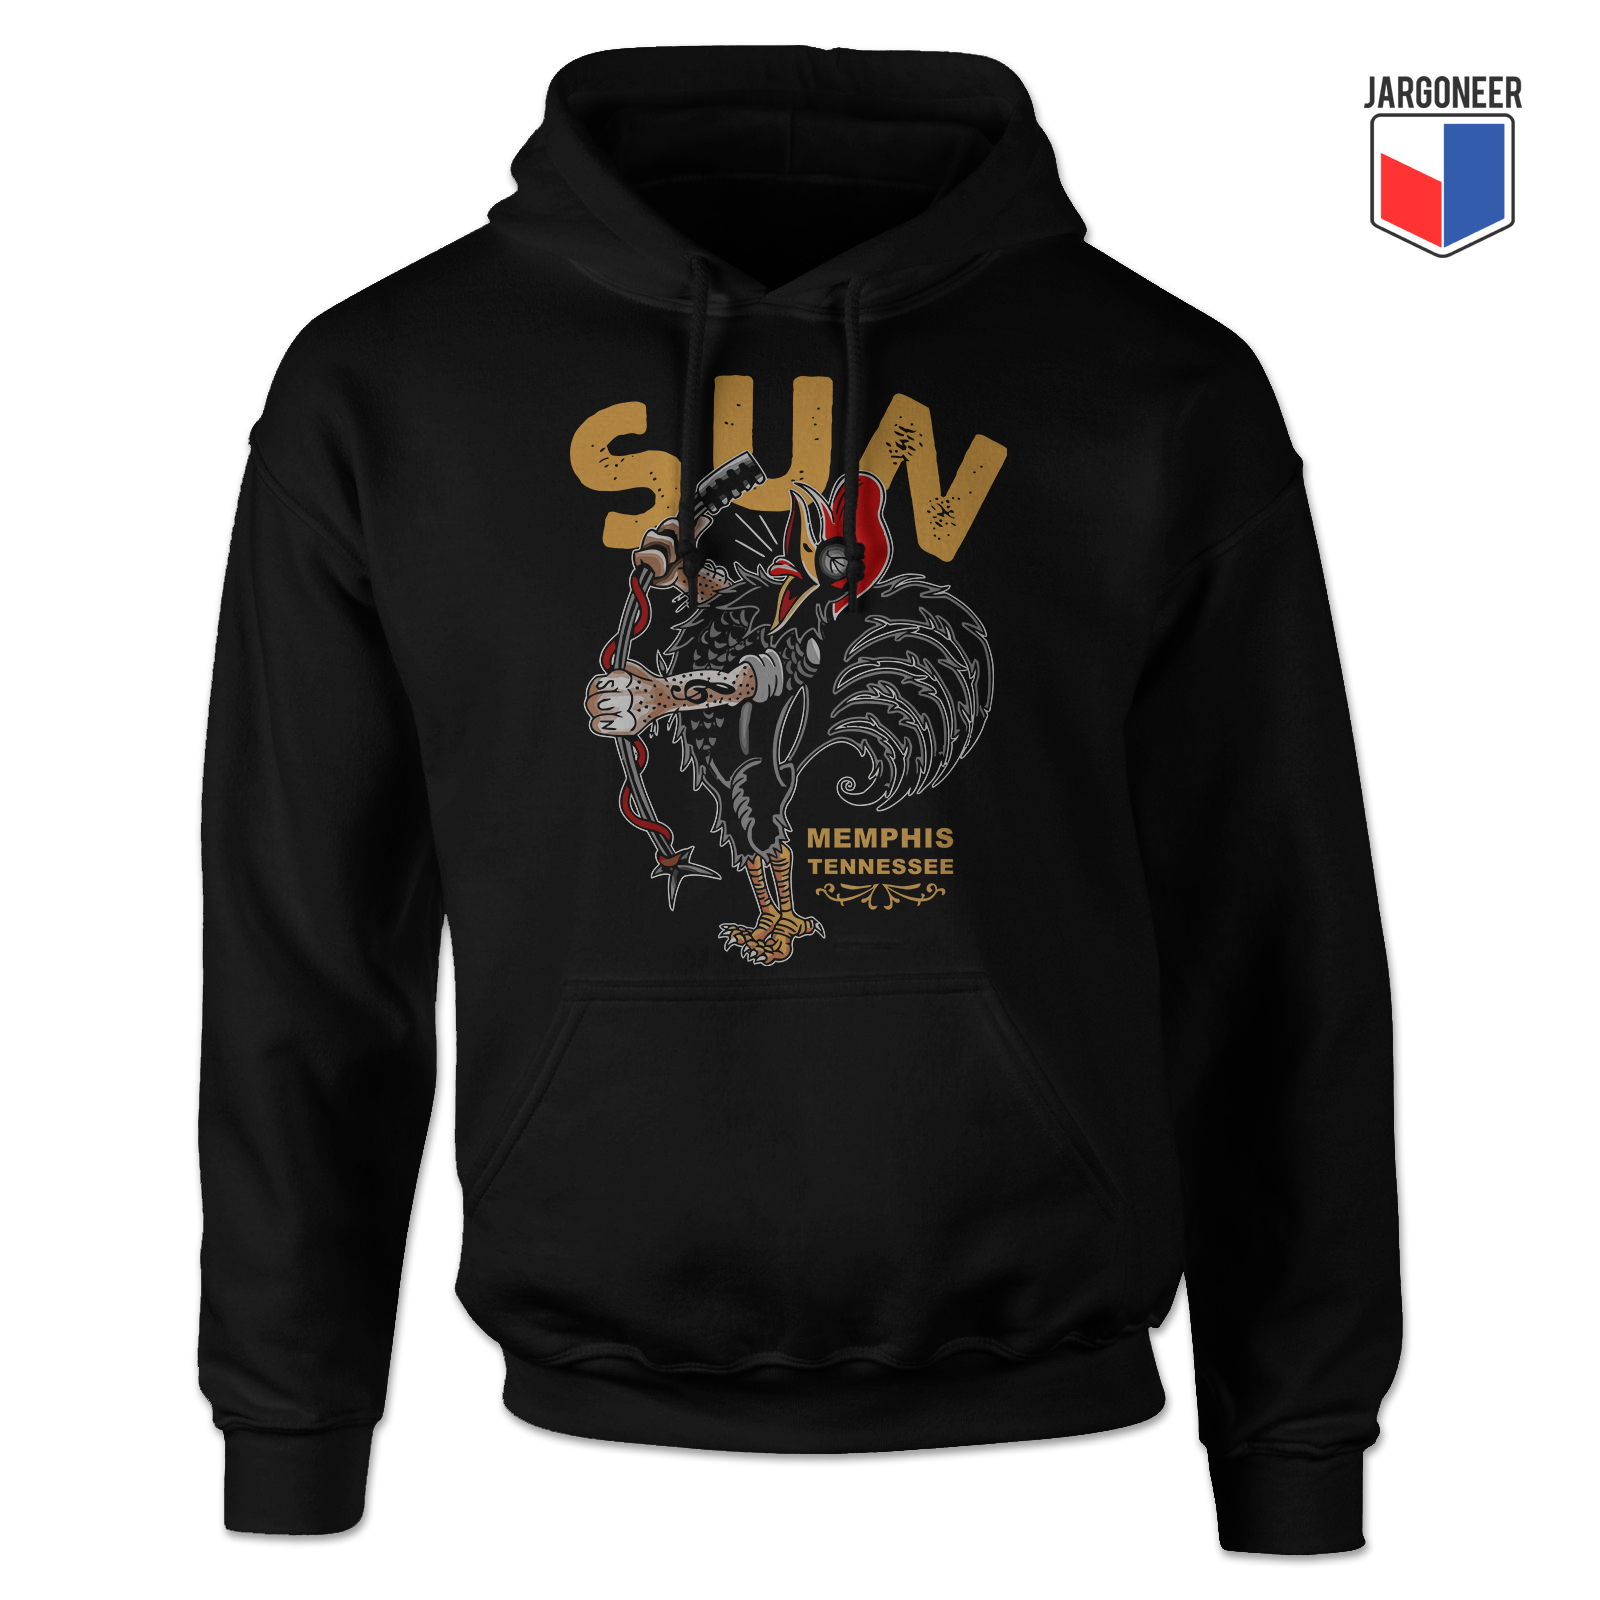 Sun Records The Singing Rooster Black Hoody - Shop Unique Graphic Cool Shirt Designs